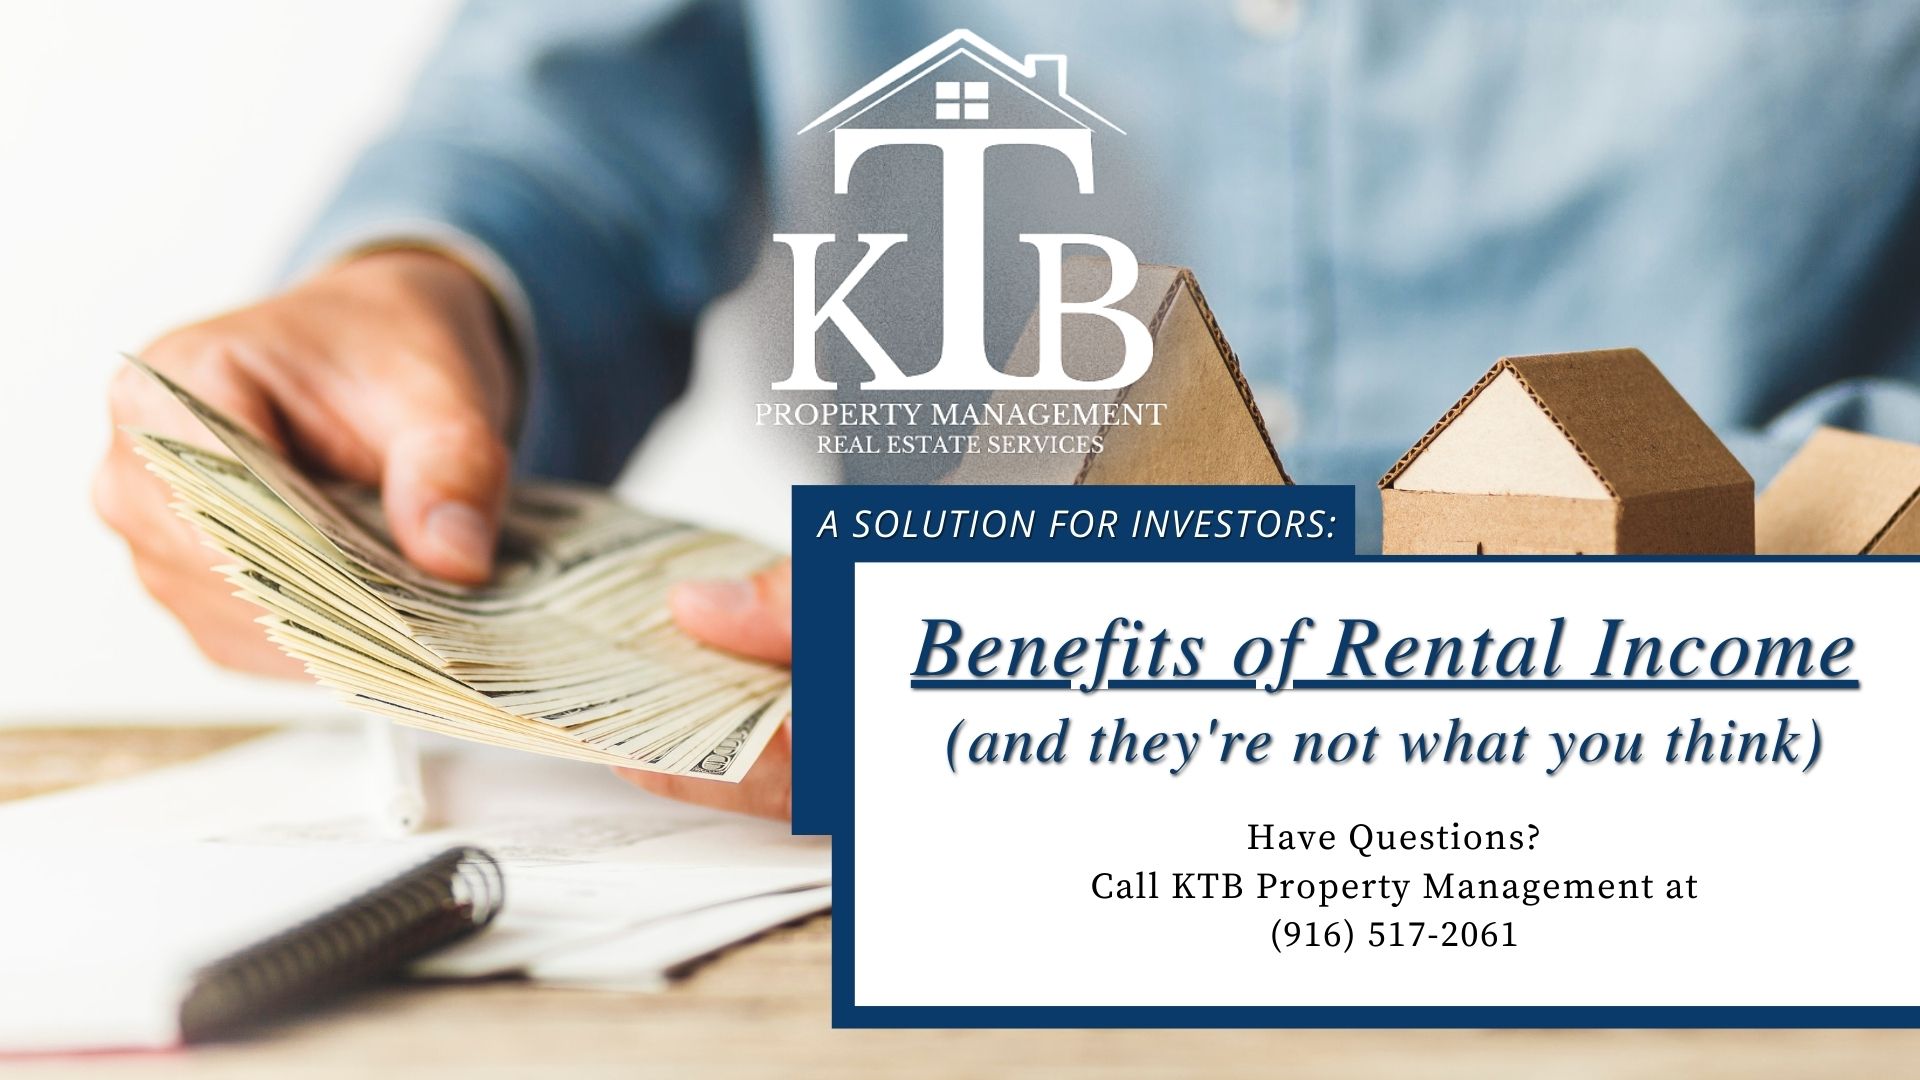 Benefits of Rental Income